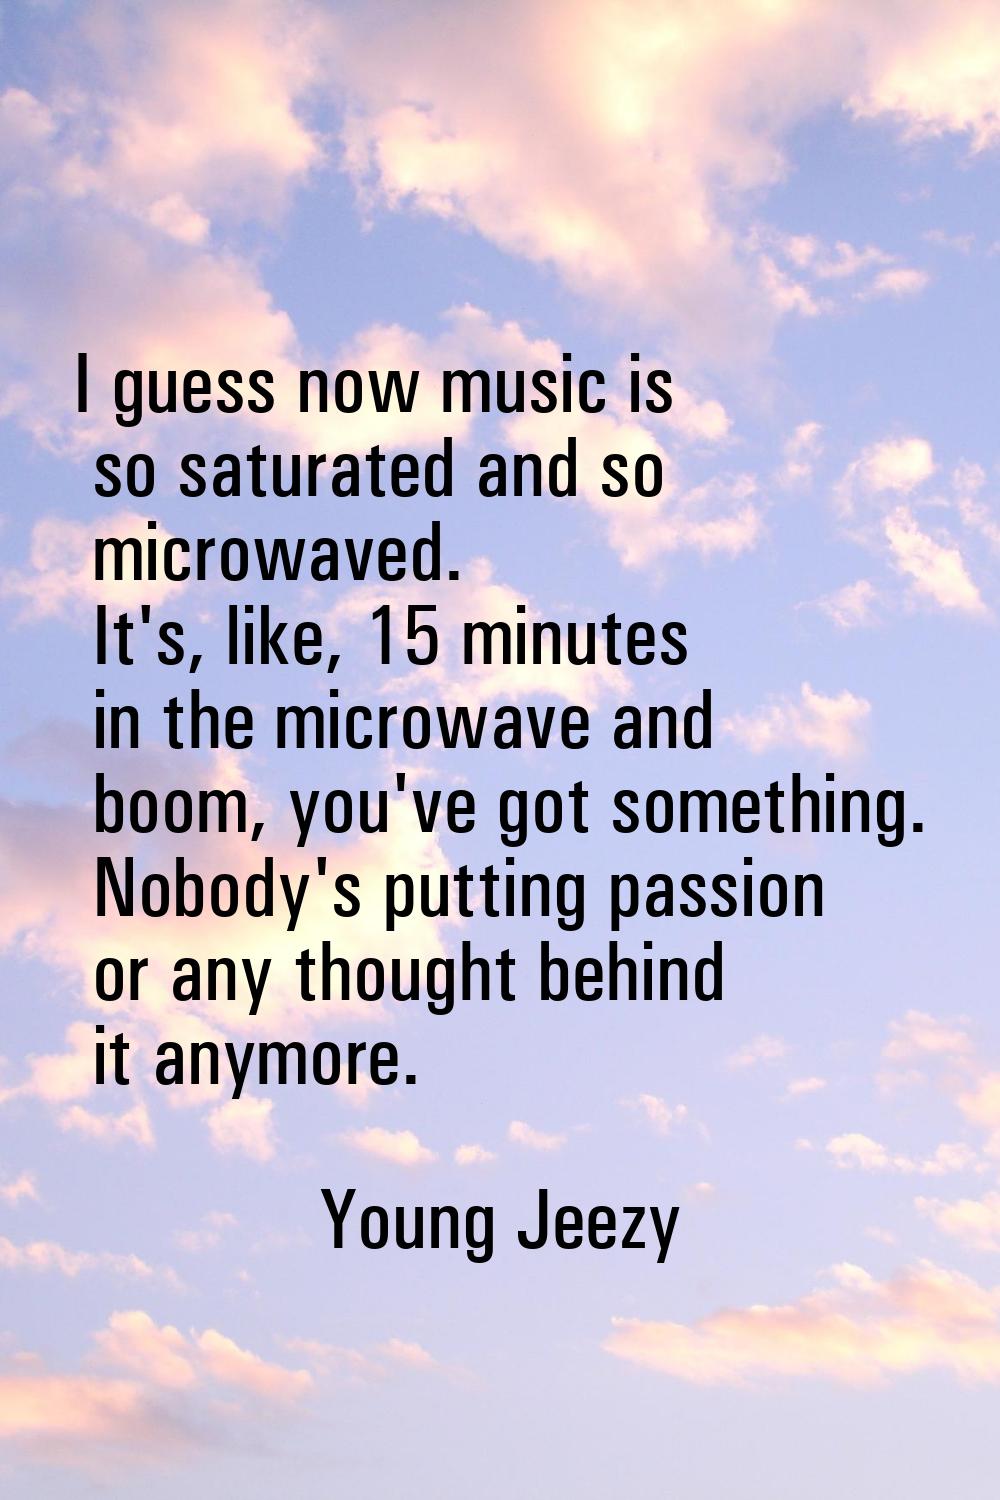 I guess now music is so saturated and so microwaved. It's, like, 15 minutes in the microwave and bo